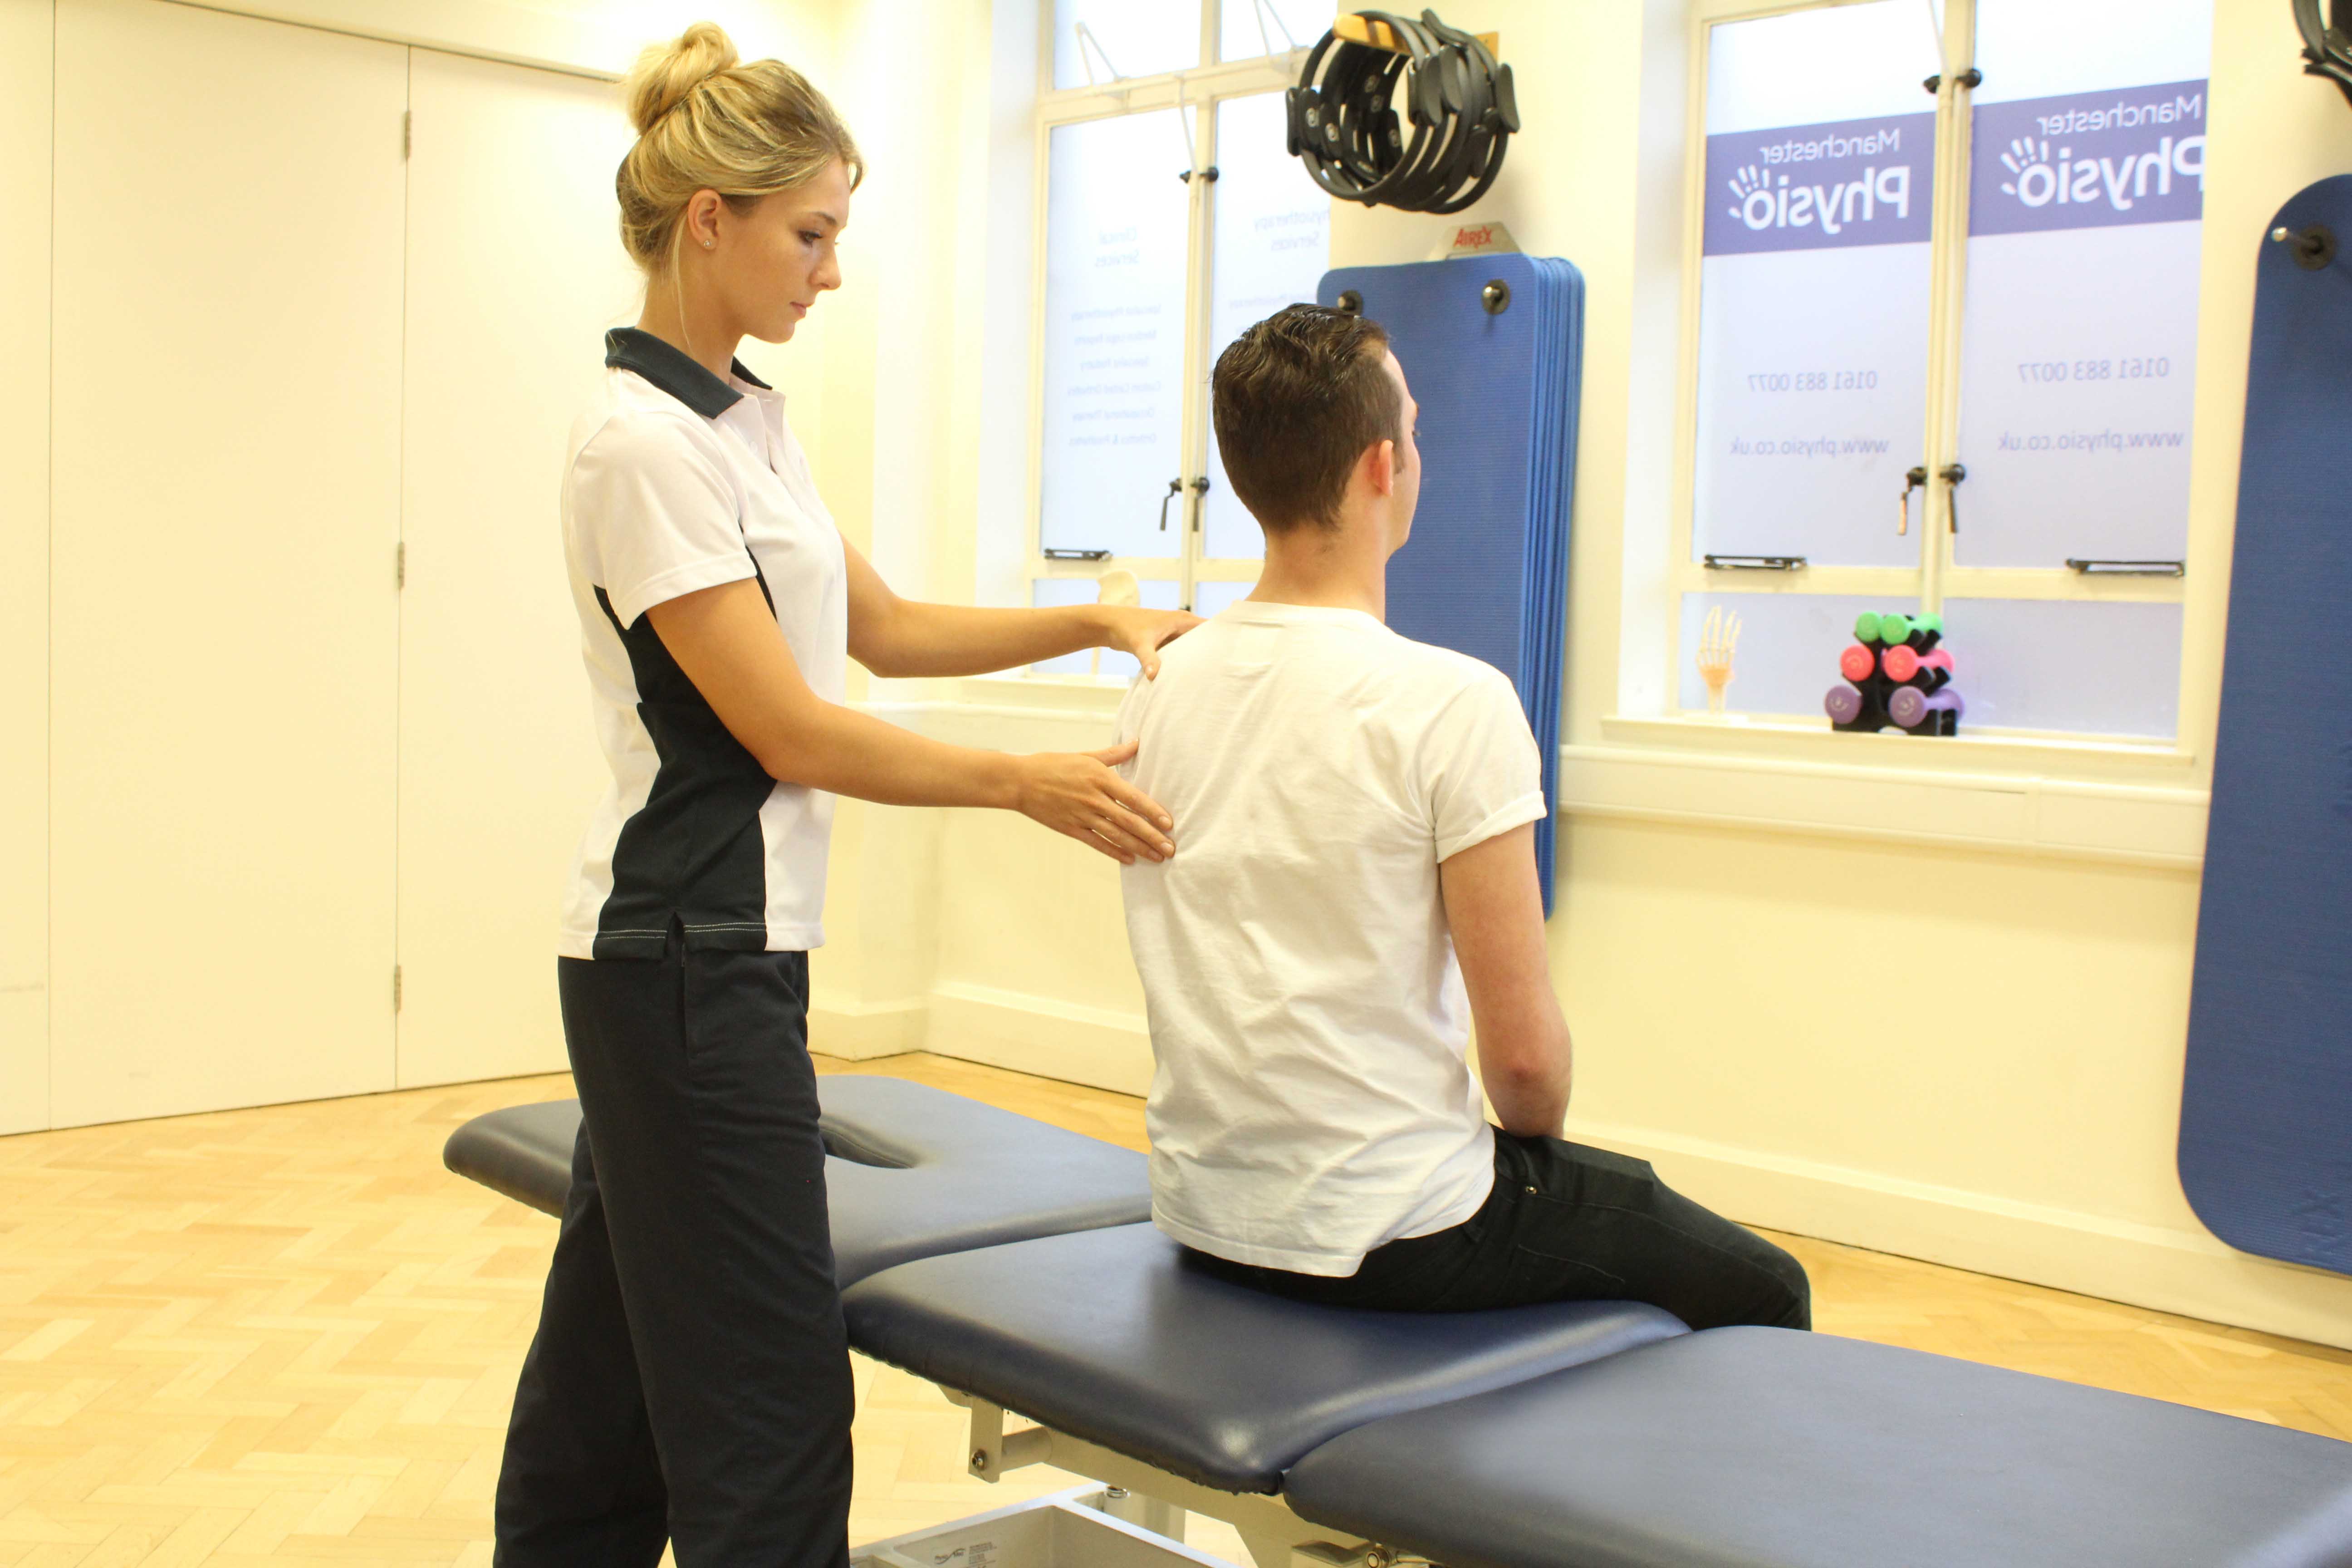 Active cycle of breathing exercises supervised by a specialist therapist